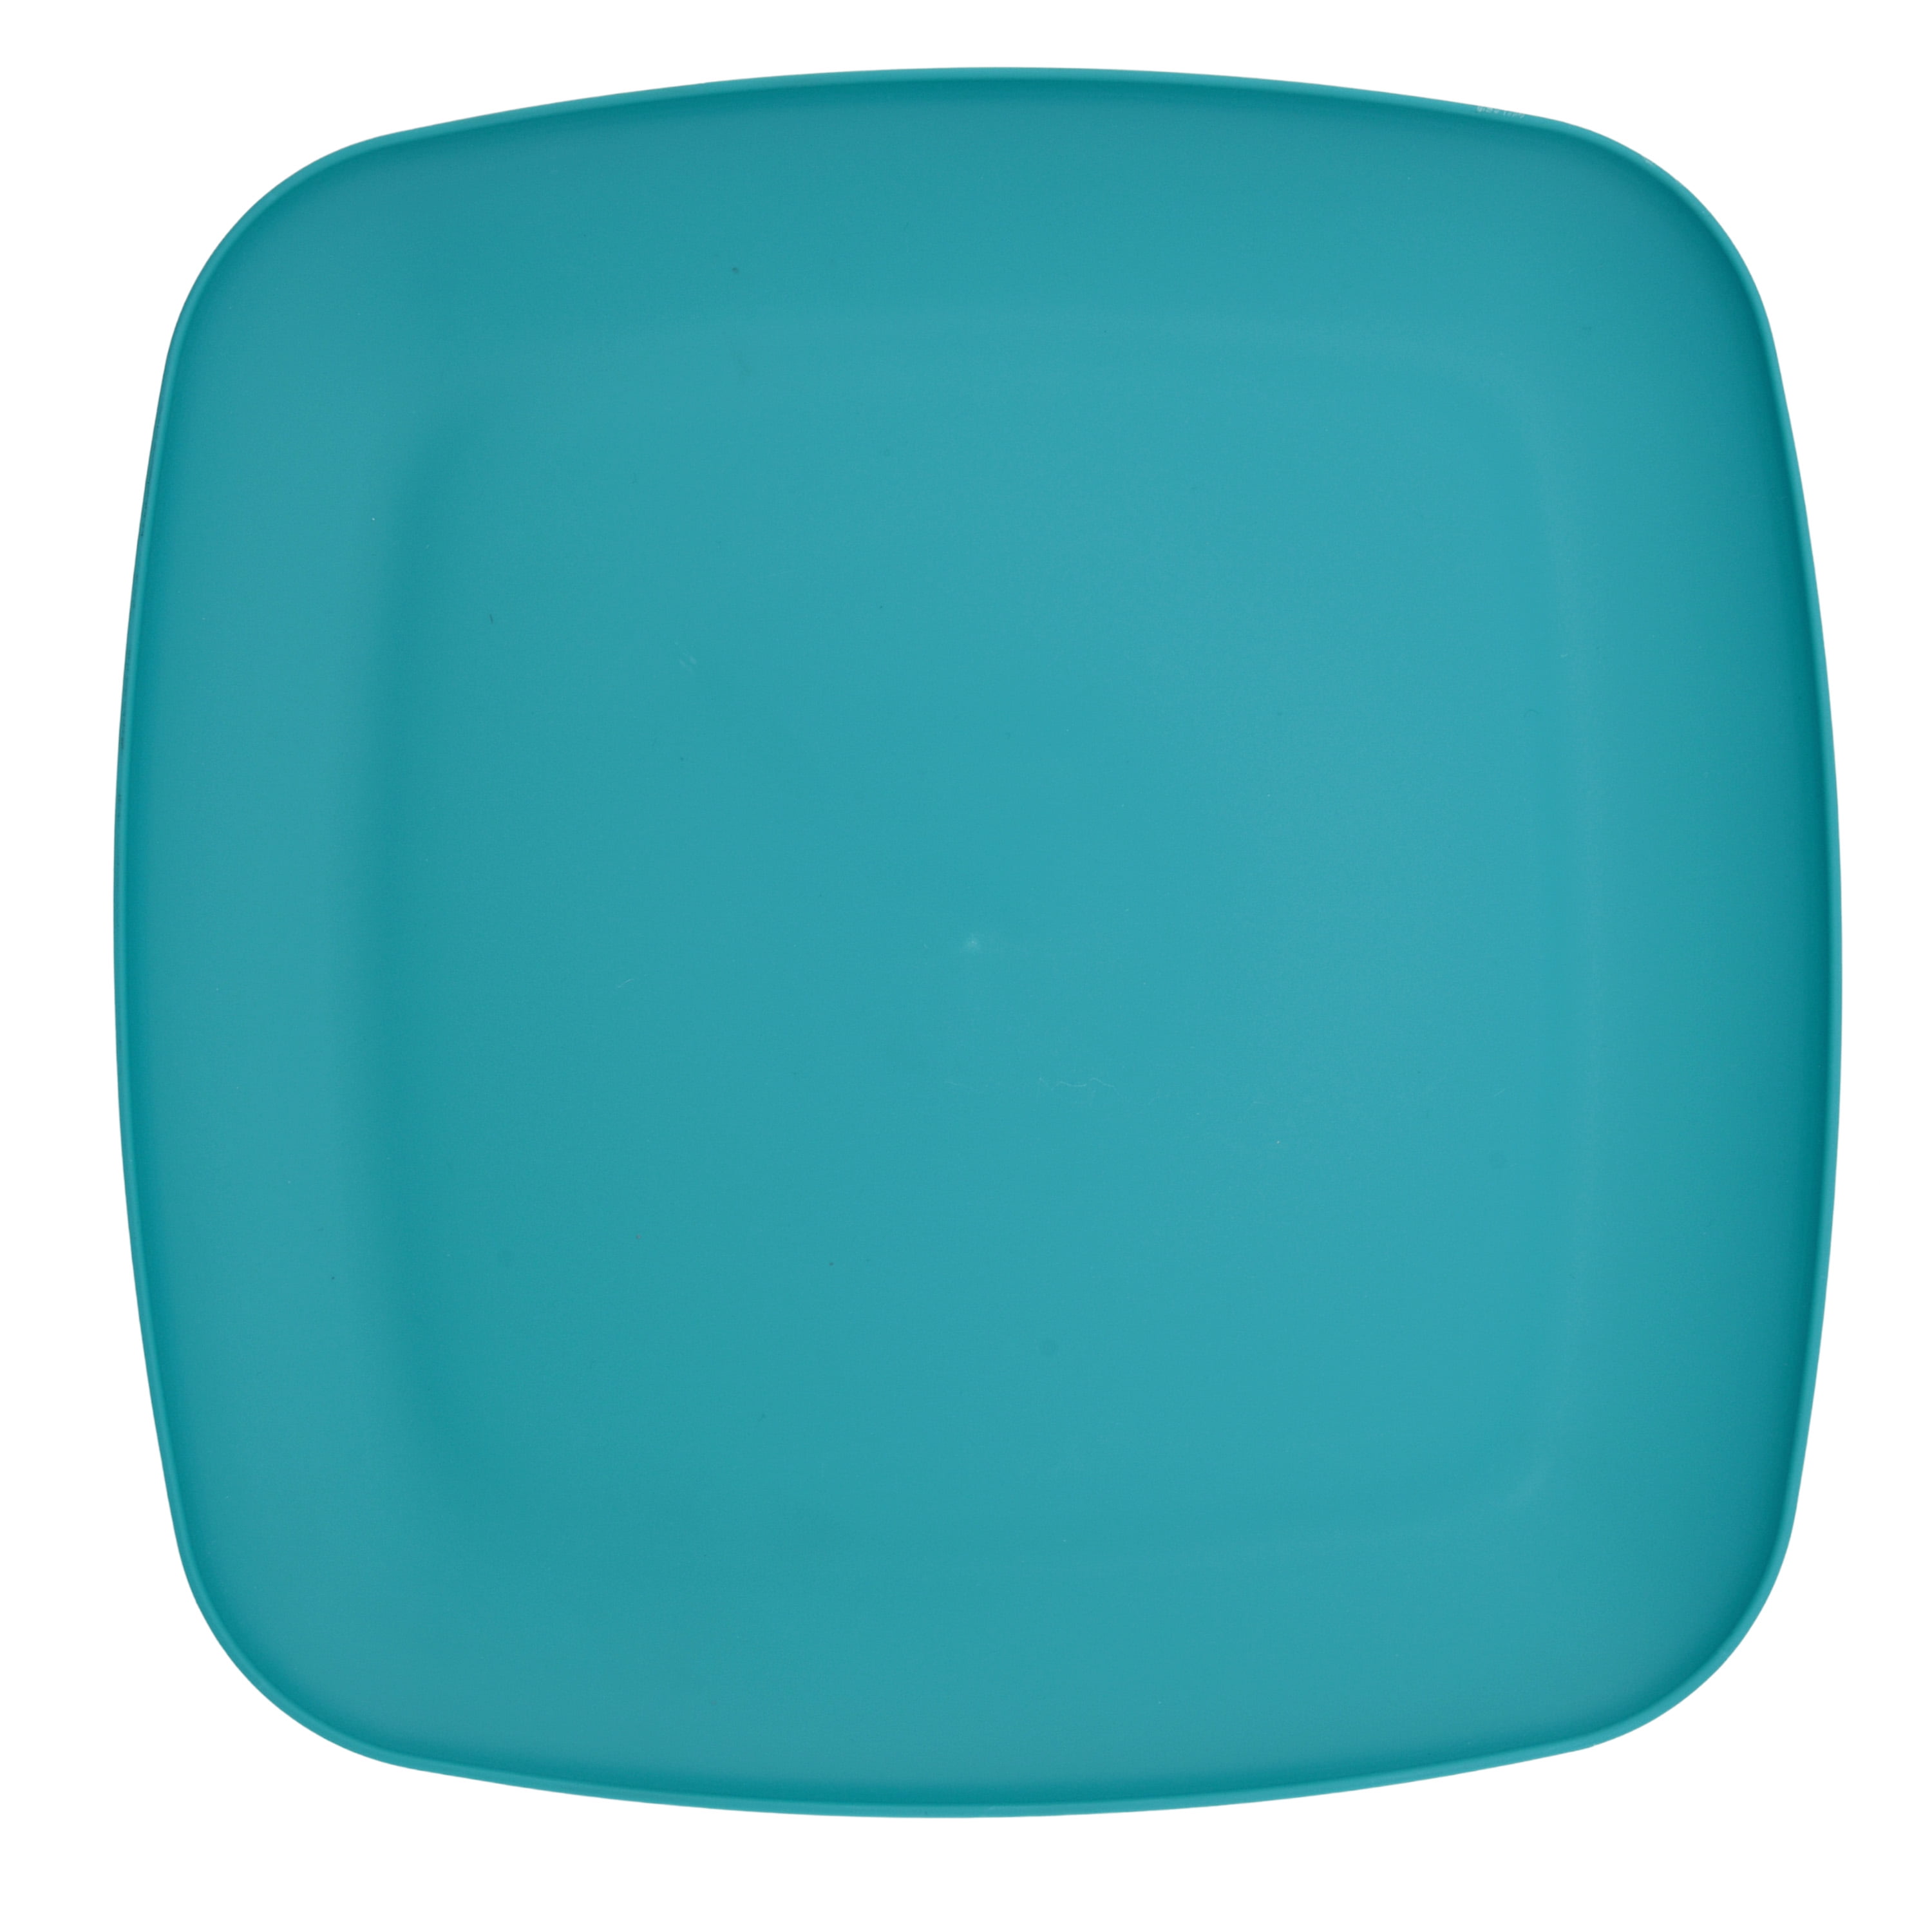 Mainstays 10.5 Inch Square Plastic Dinner Plate, Teal